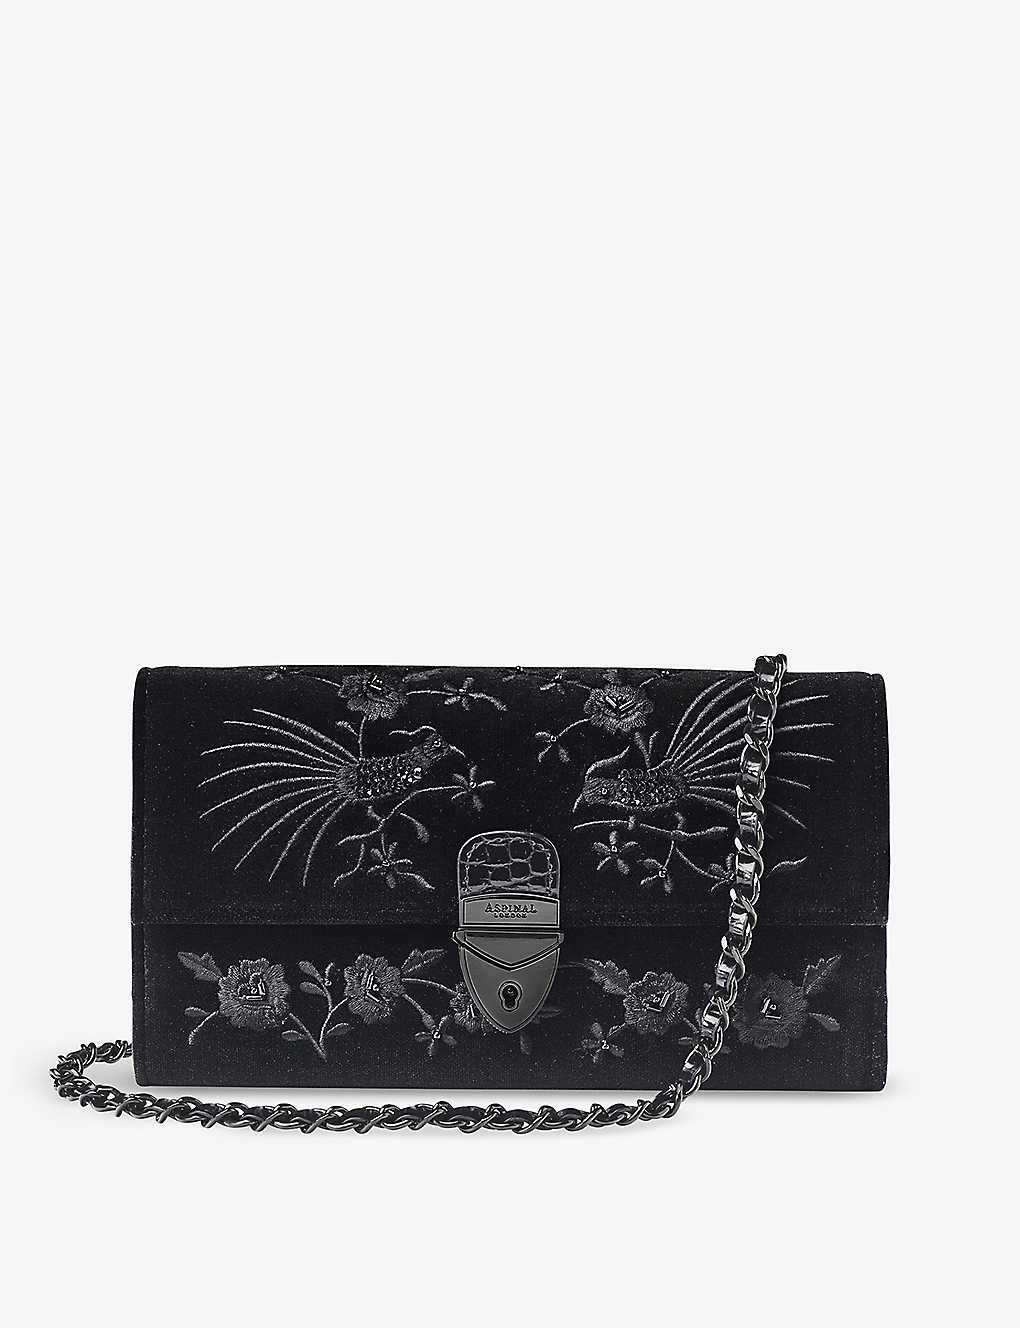 Aspinal Of London Womens Black Mayfair Flower-embroidered Leather Clutch Bag